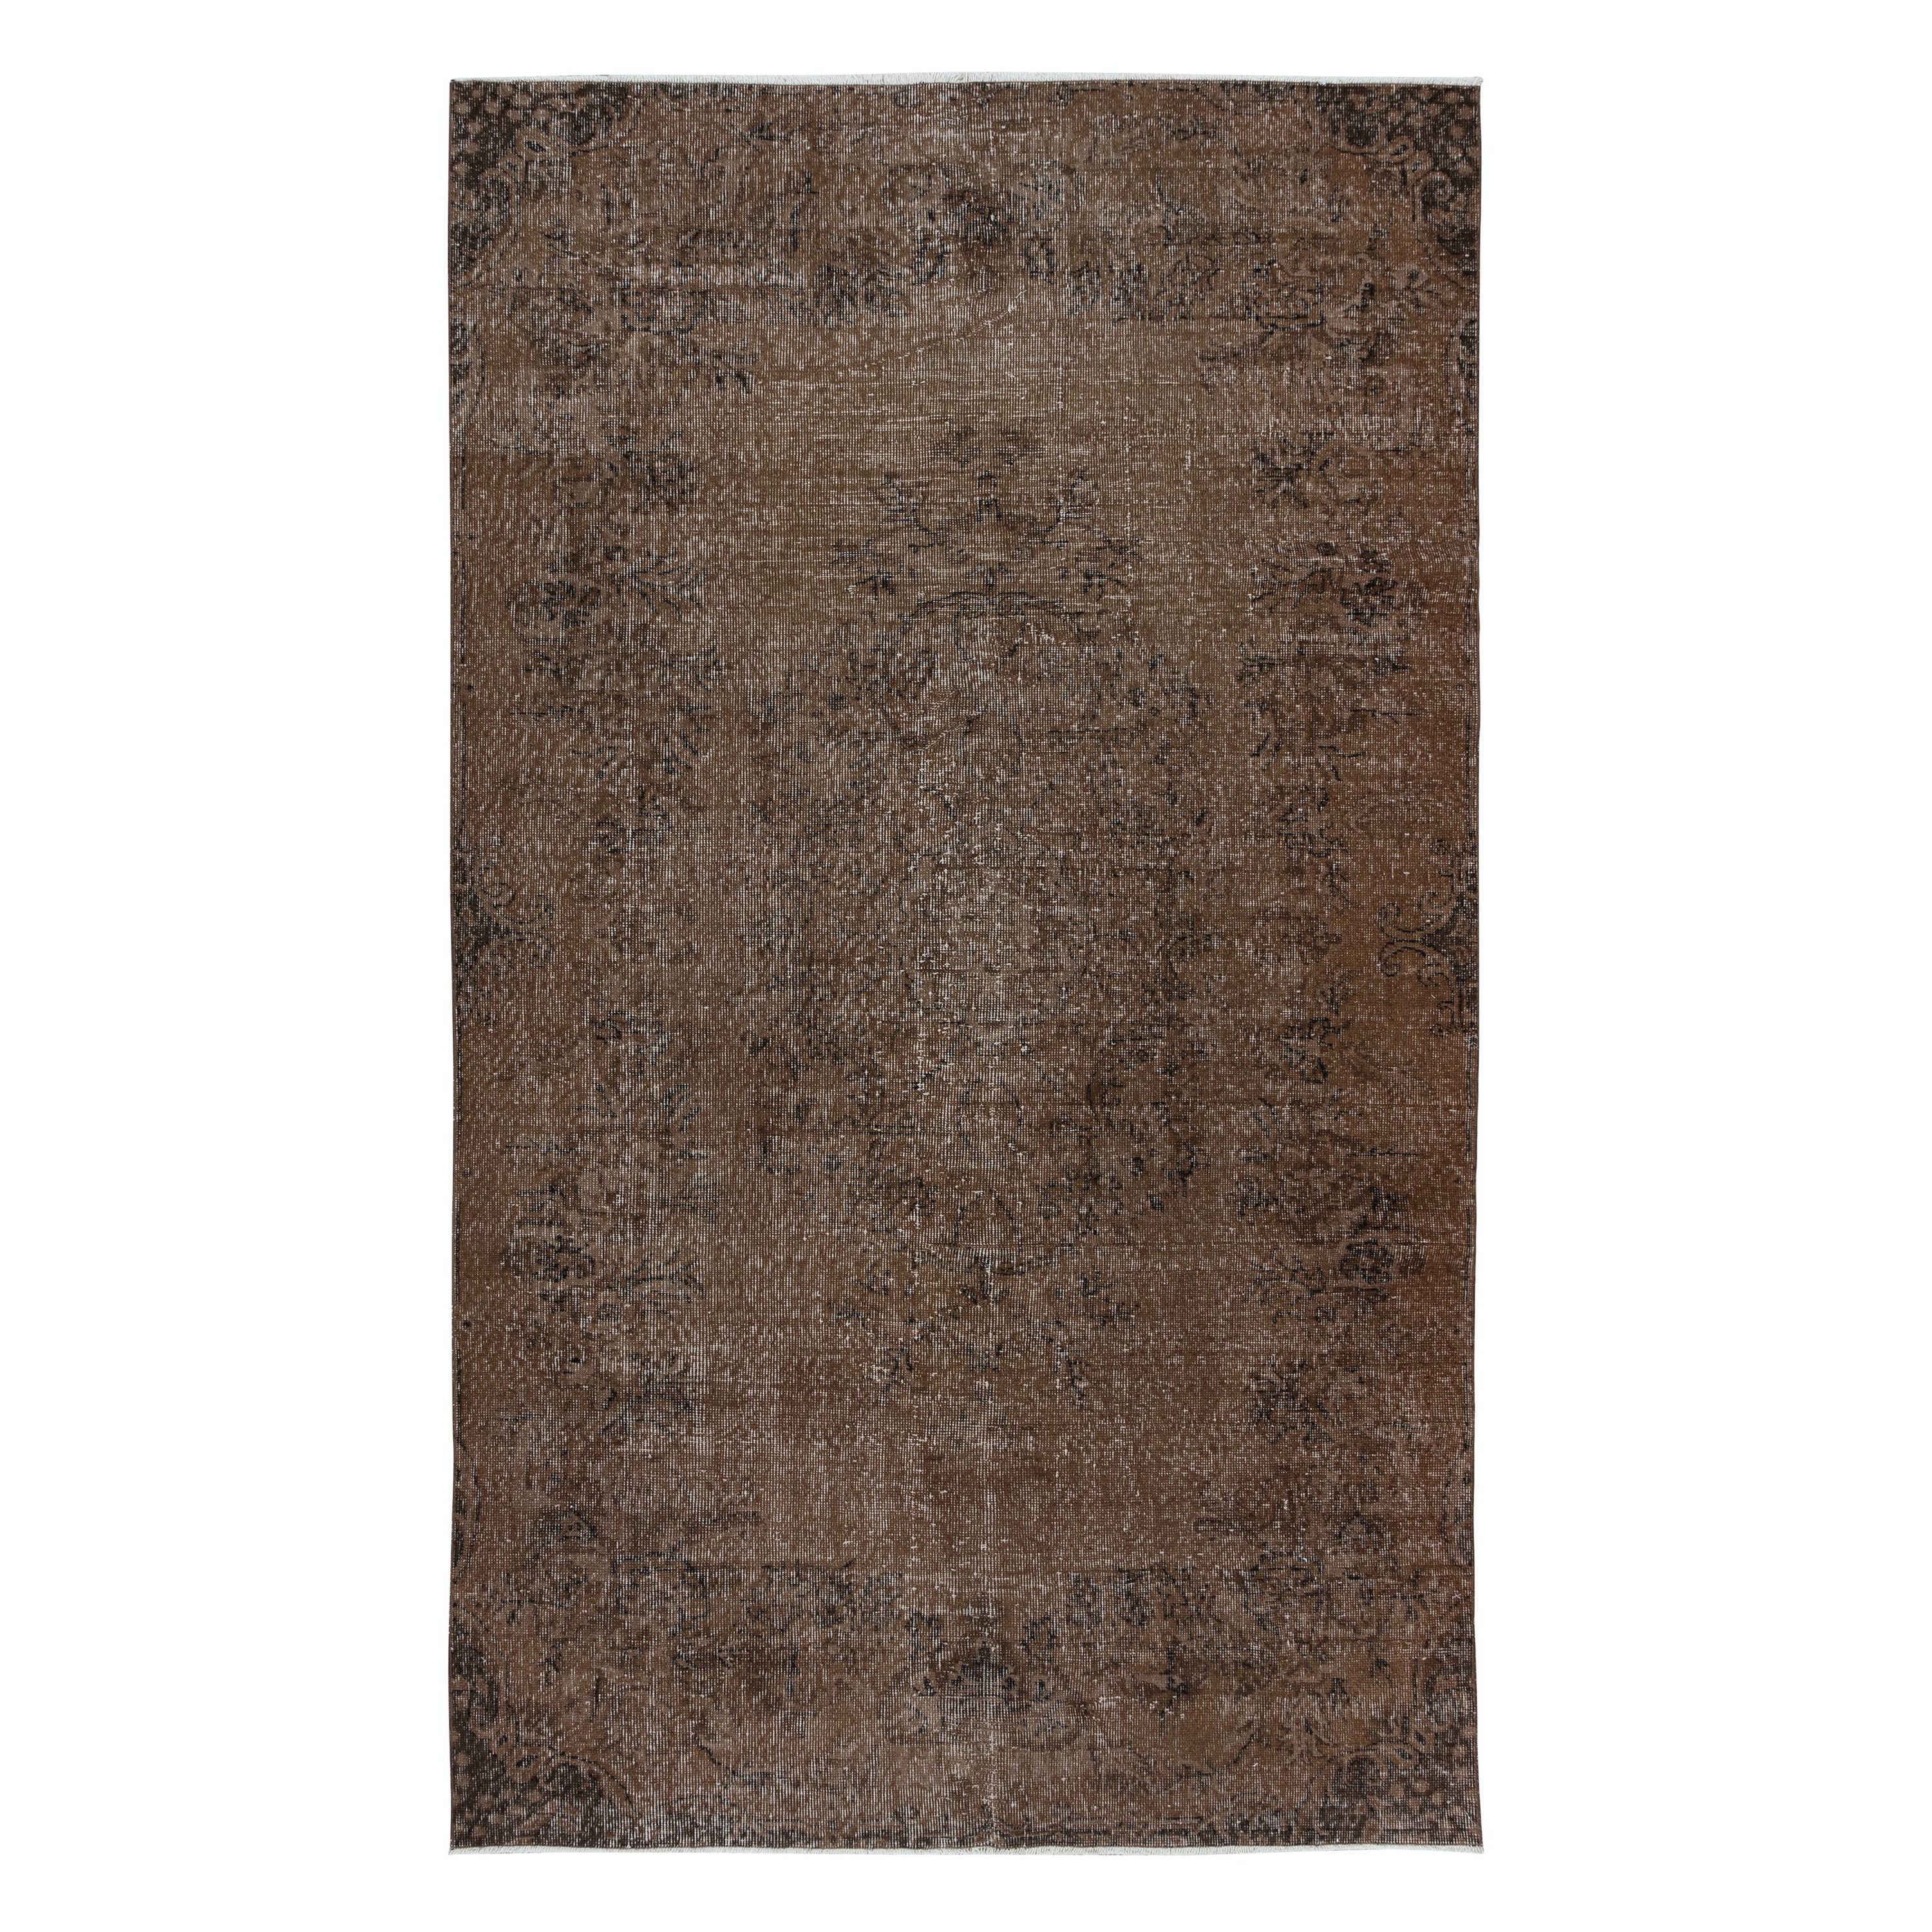 5.7x9.6 Ft Vintage Area Rug in Brown for Modern Interiors, HandKnotted in Turkey